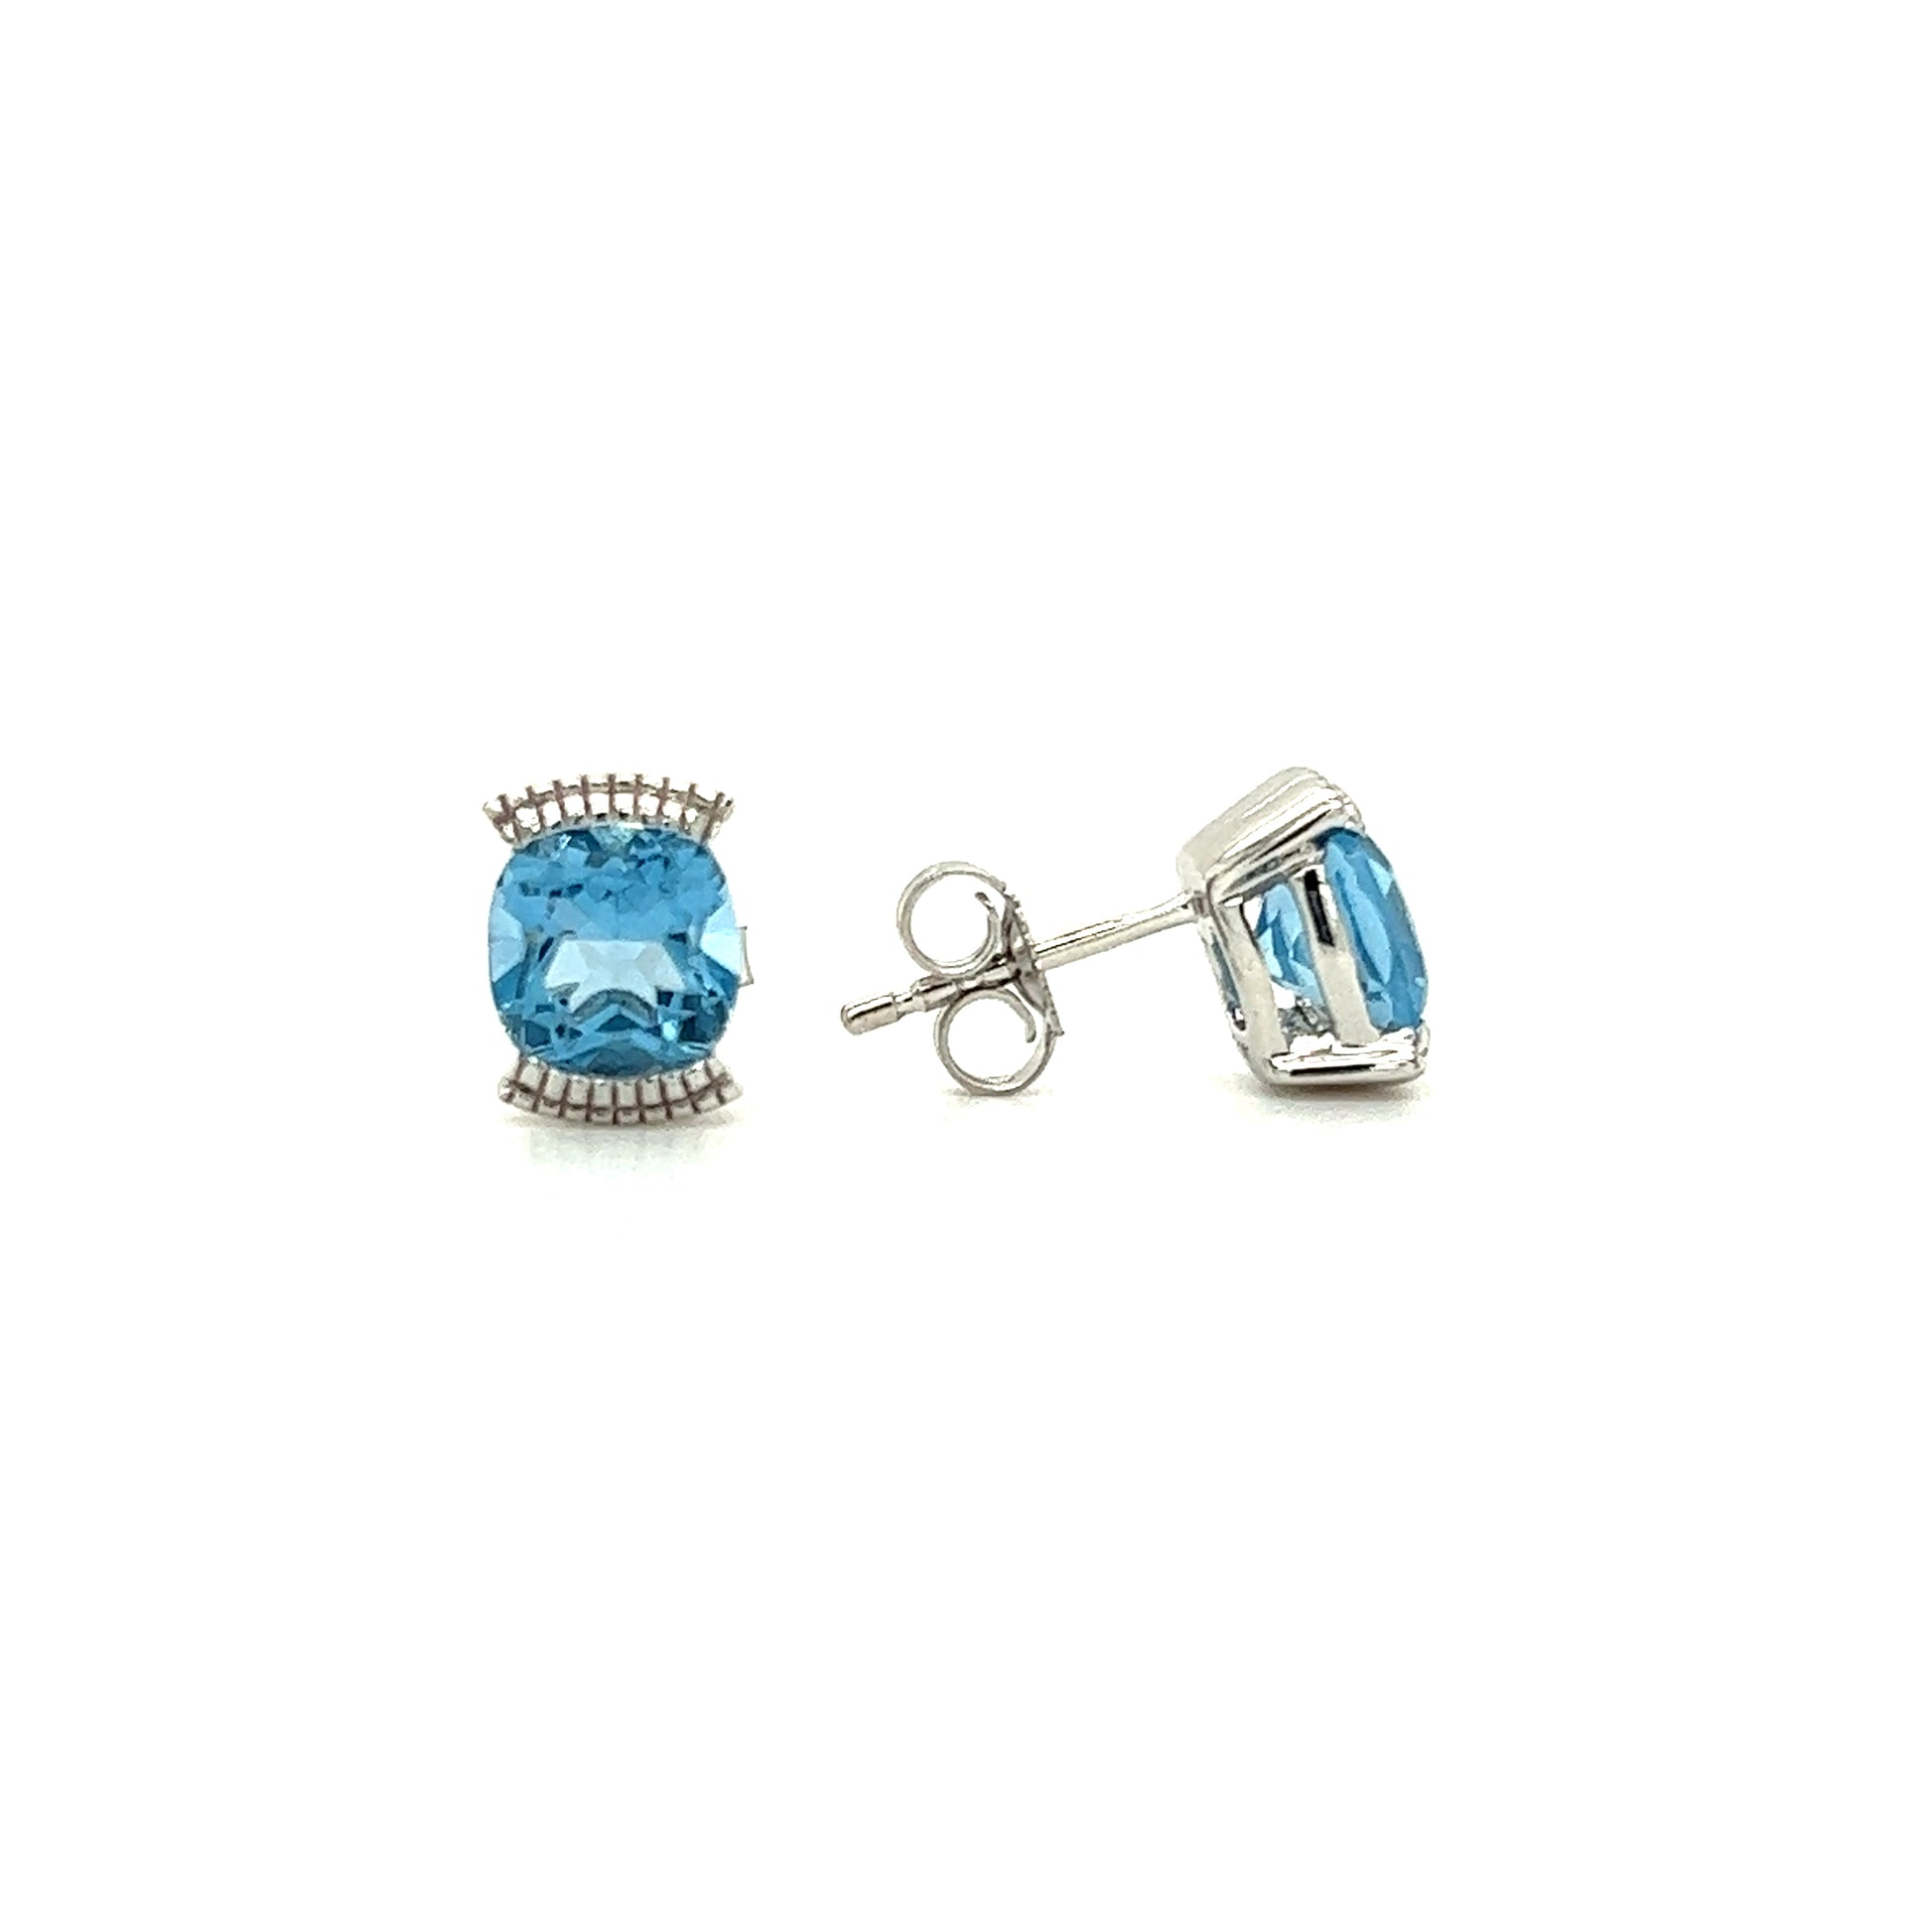 Cushion Blue Topaz Stud Earrings with 1.78ctw of Swiss Blue Topaz in 14K White Gold Front and Side View